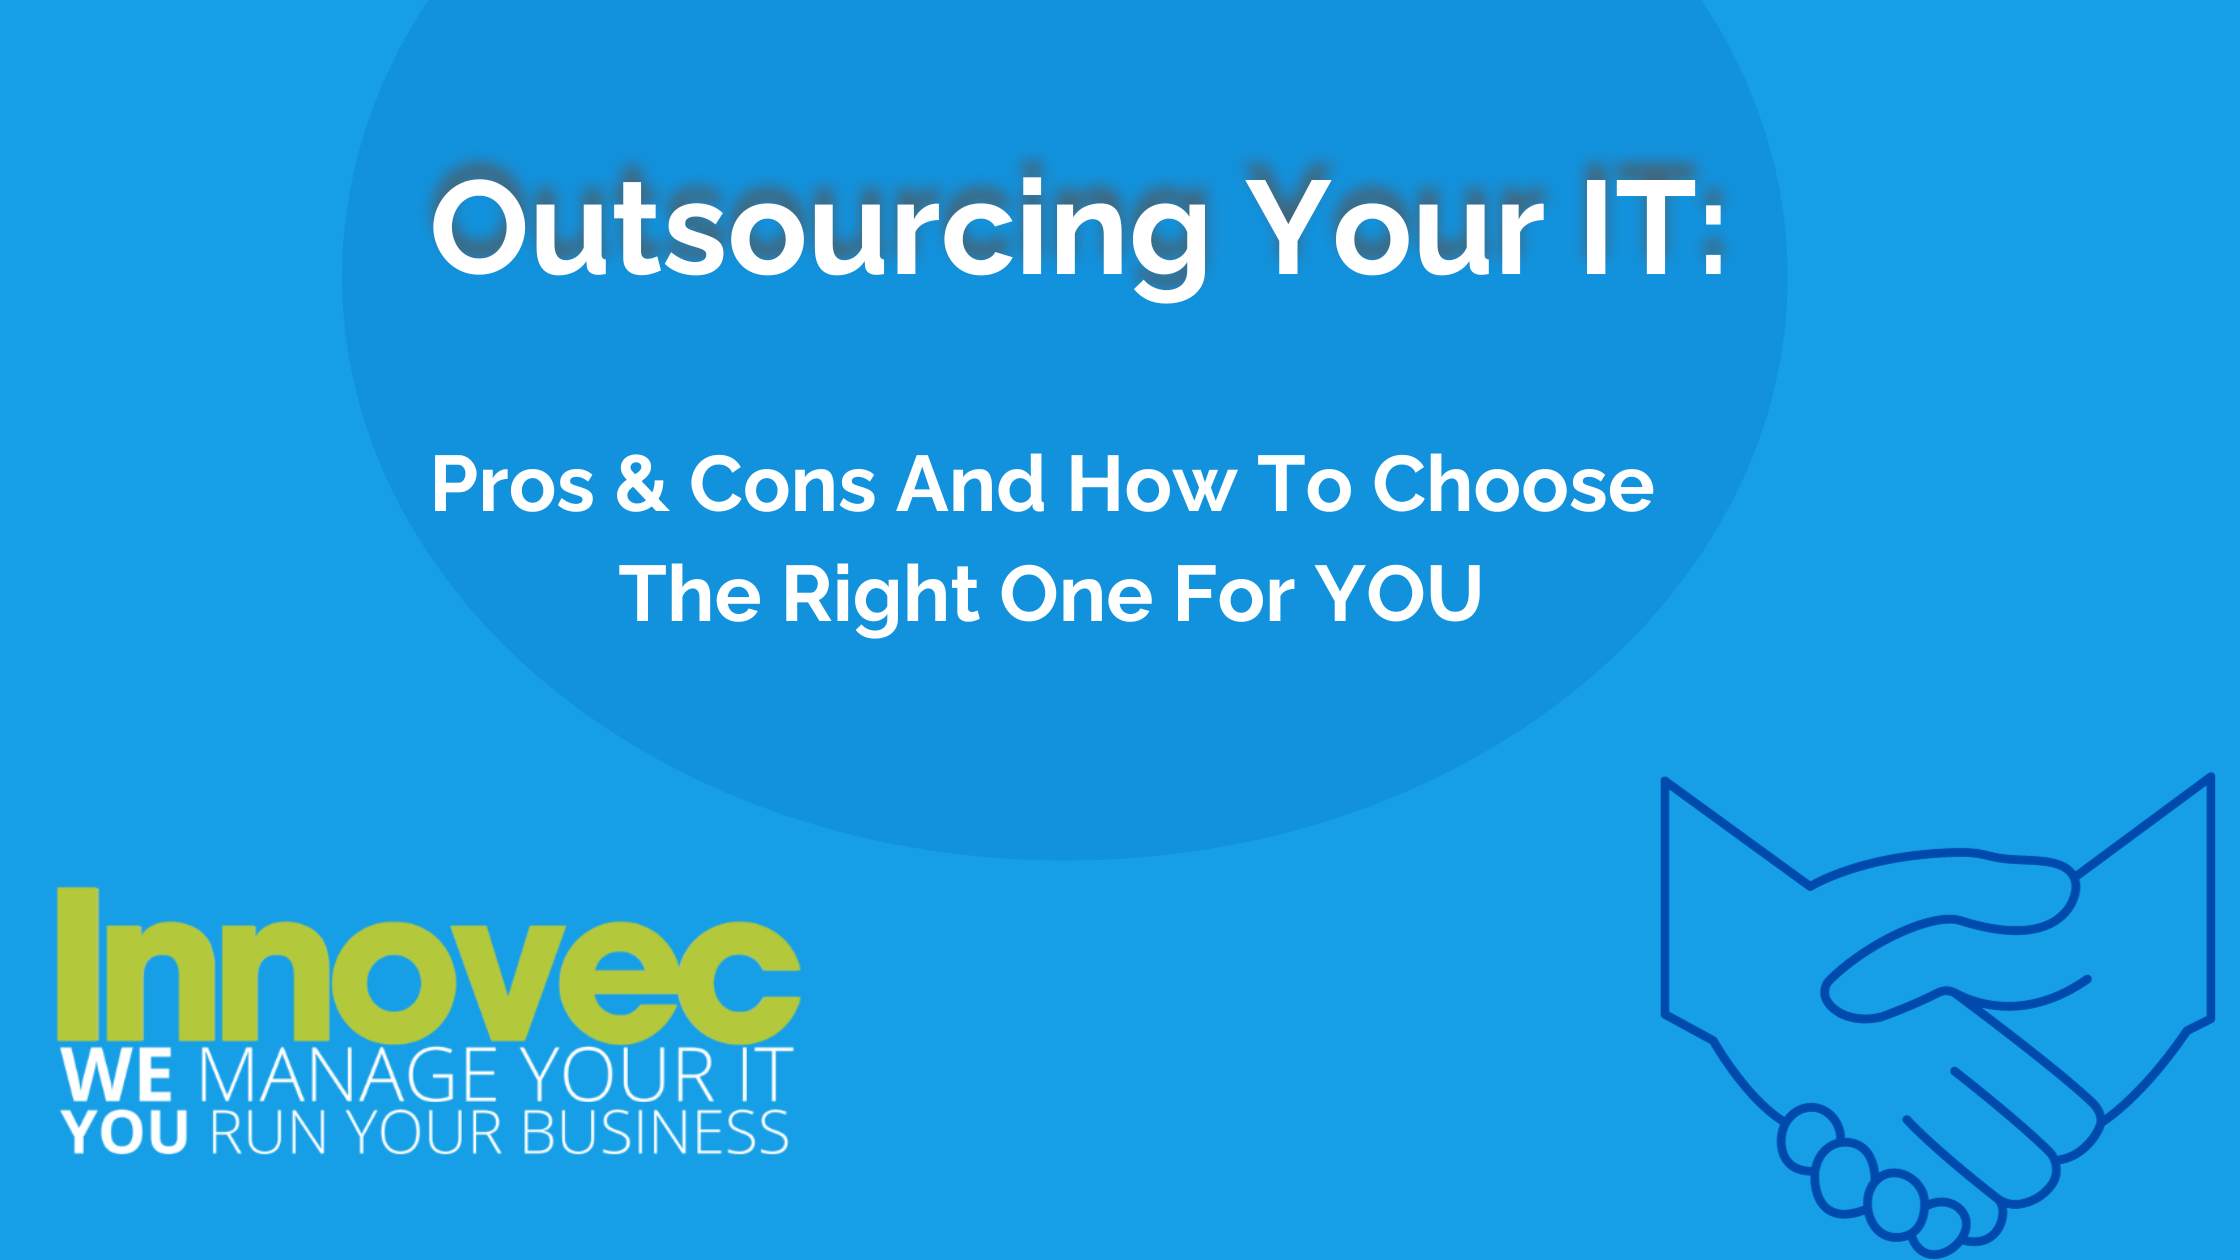 Outsourcing your IT, Pros & Cons and How to choose the right one